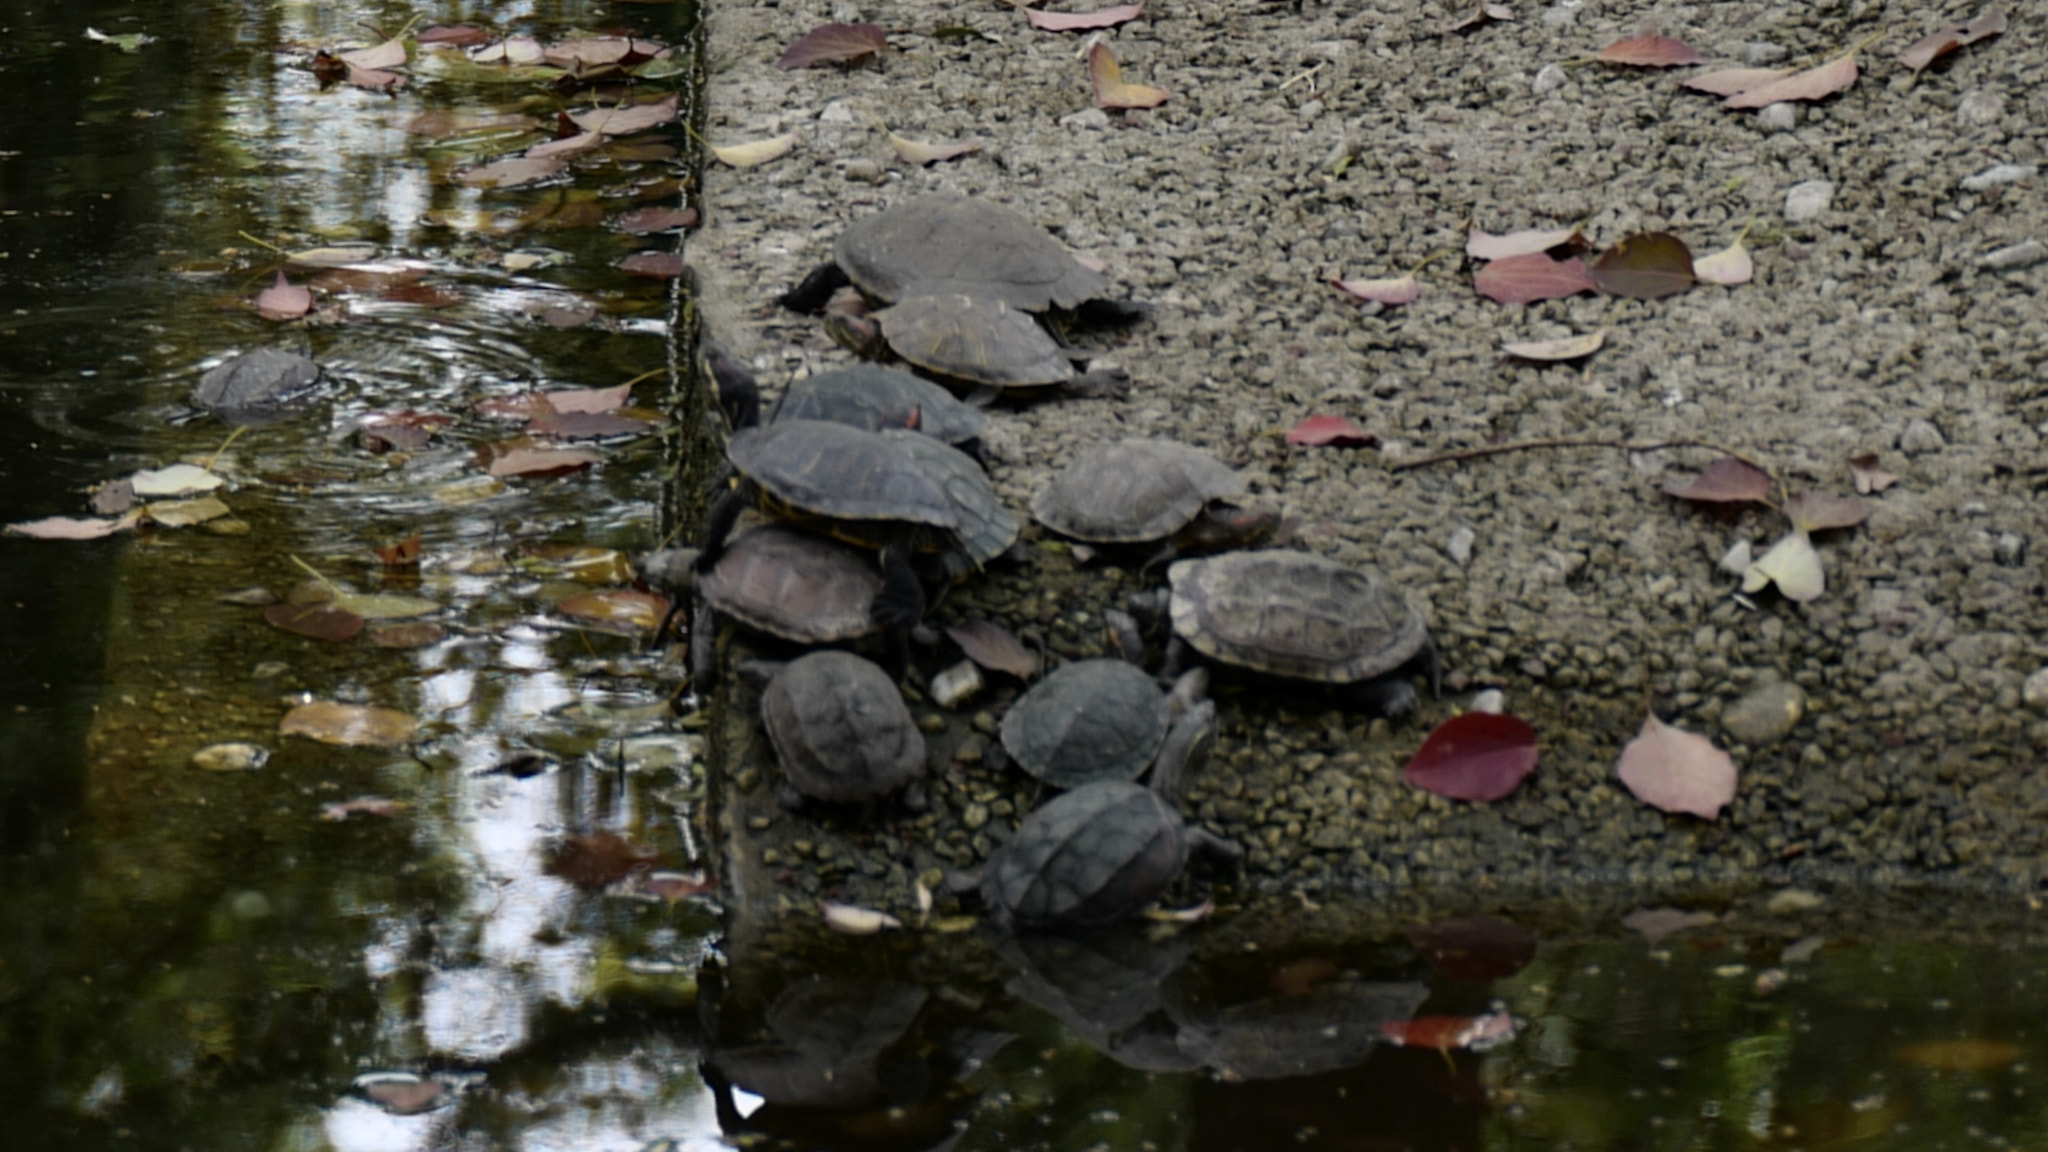 VARIO-ELMARIT 1:2.8-4.0/24-90mm ASPH. OIS sample photo. The basking turtles in temple 01 photography